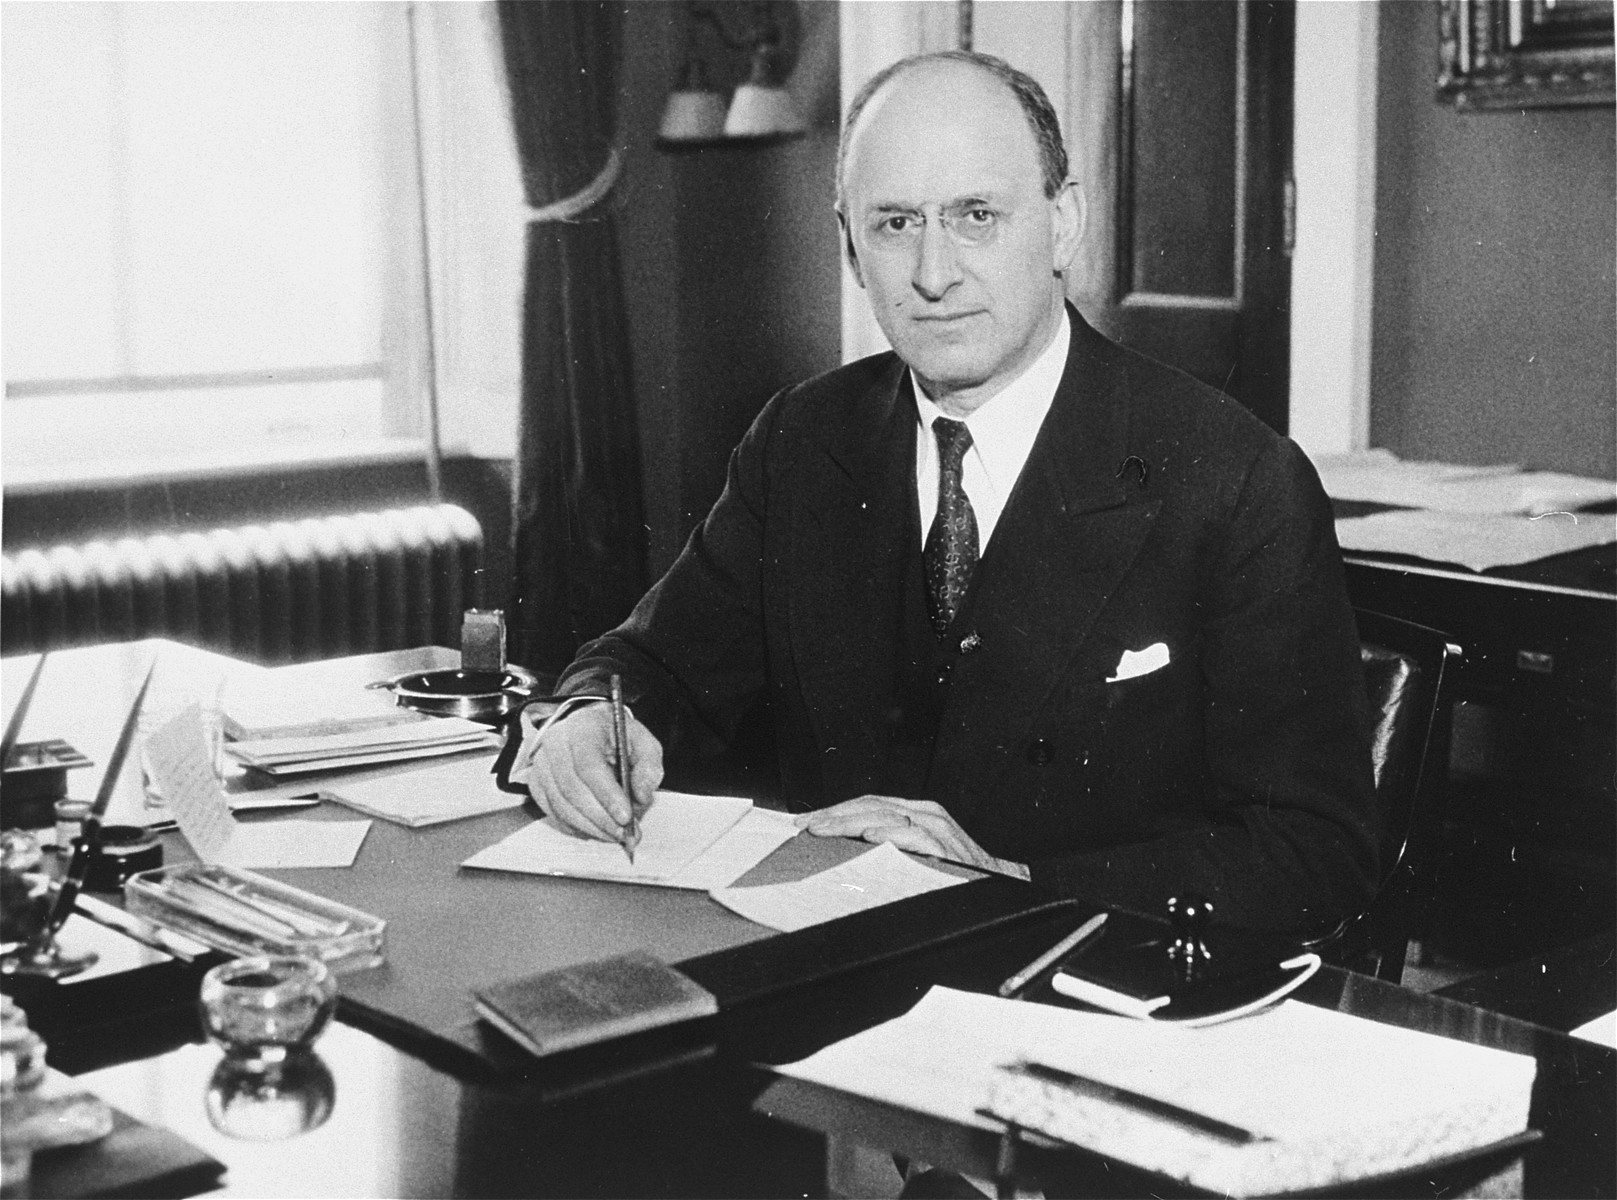 Portrait of Henry Morgenthau Jr. at his desk in the U.S. Department of the Treasury.

Henry Morgenthau Jr. (1891-1967), served as Secretary of the Treasury under Franklin Roosevelt, and as such, was the highest ranking Jewish official in the administration.    In January 1944, after receiving a report prepared by his subordinates on "the acquiescence of this government in the murder of the Jews," Morgenthau wrote a personal report to the President which led to the establishment of the War Refugee Board.   After the war he became Chairman of the United Jewish Appeal and served in that capacity until 1950.